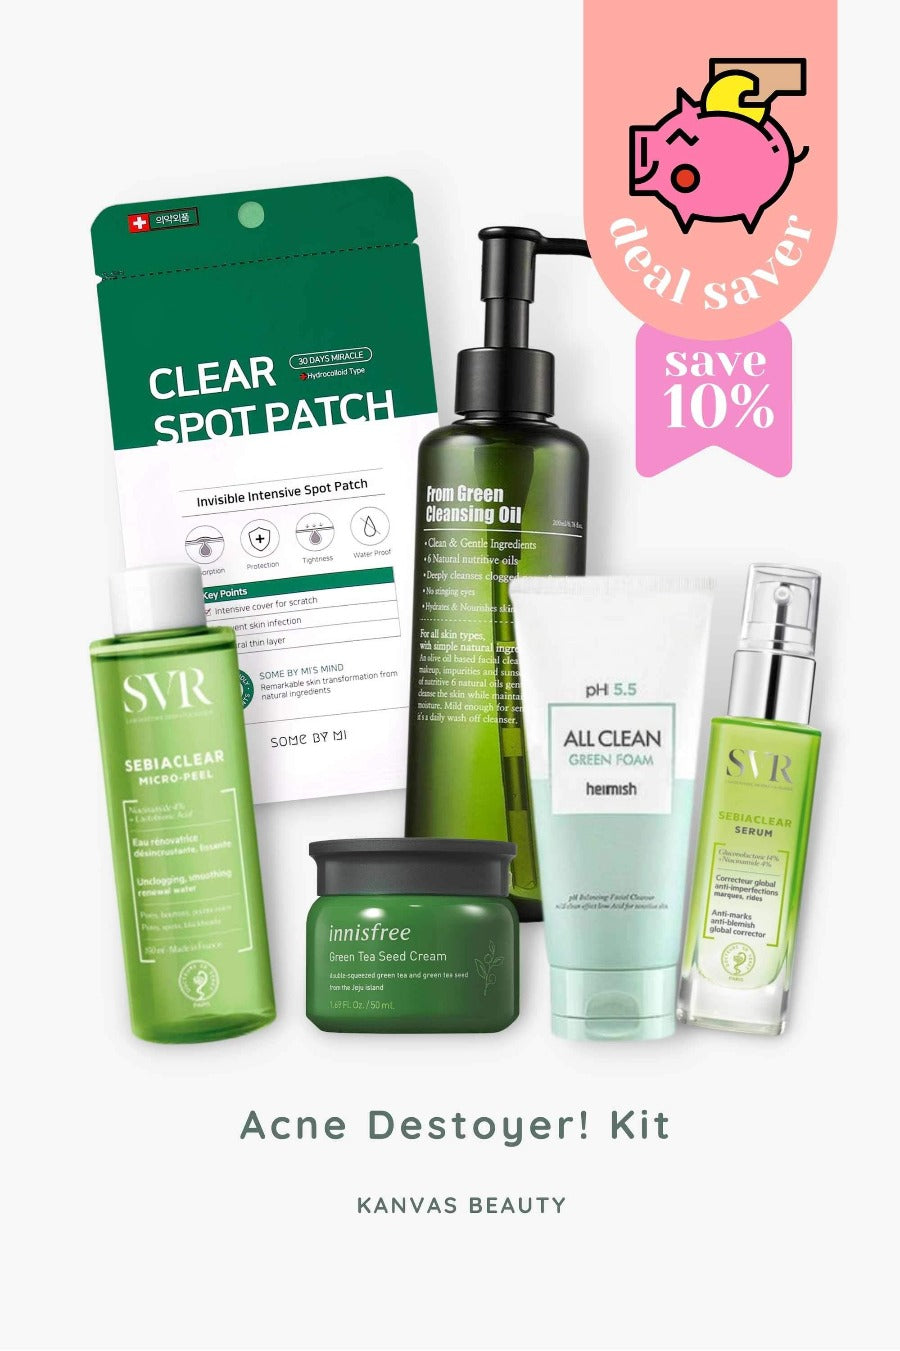 acne kit acne-prone skin say goodbye to acne cleasnsing oil serum sebiaclear innisfree heimish all clean clear pot patch some by mi australian korean skincare beauty french